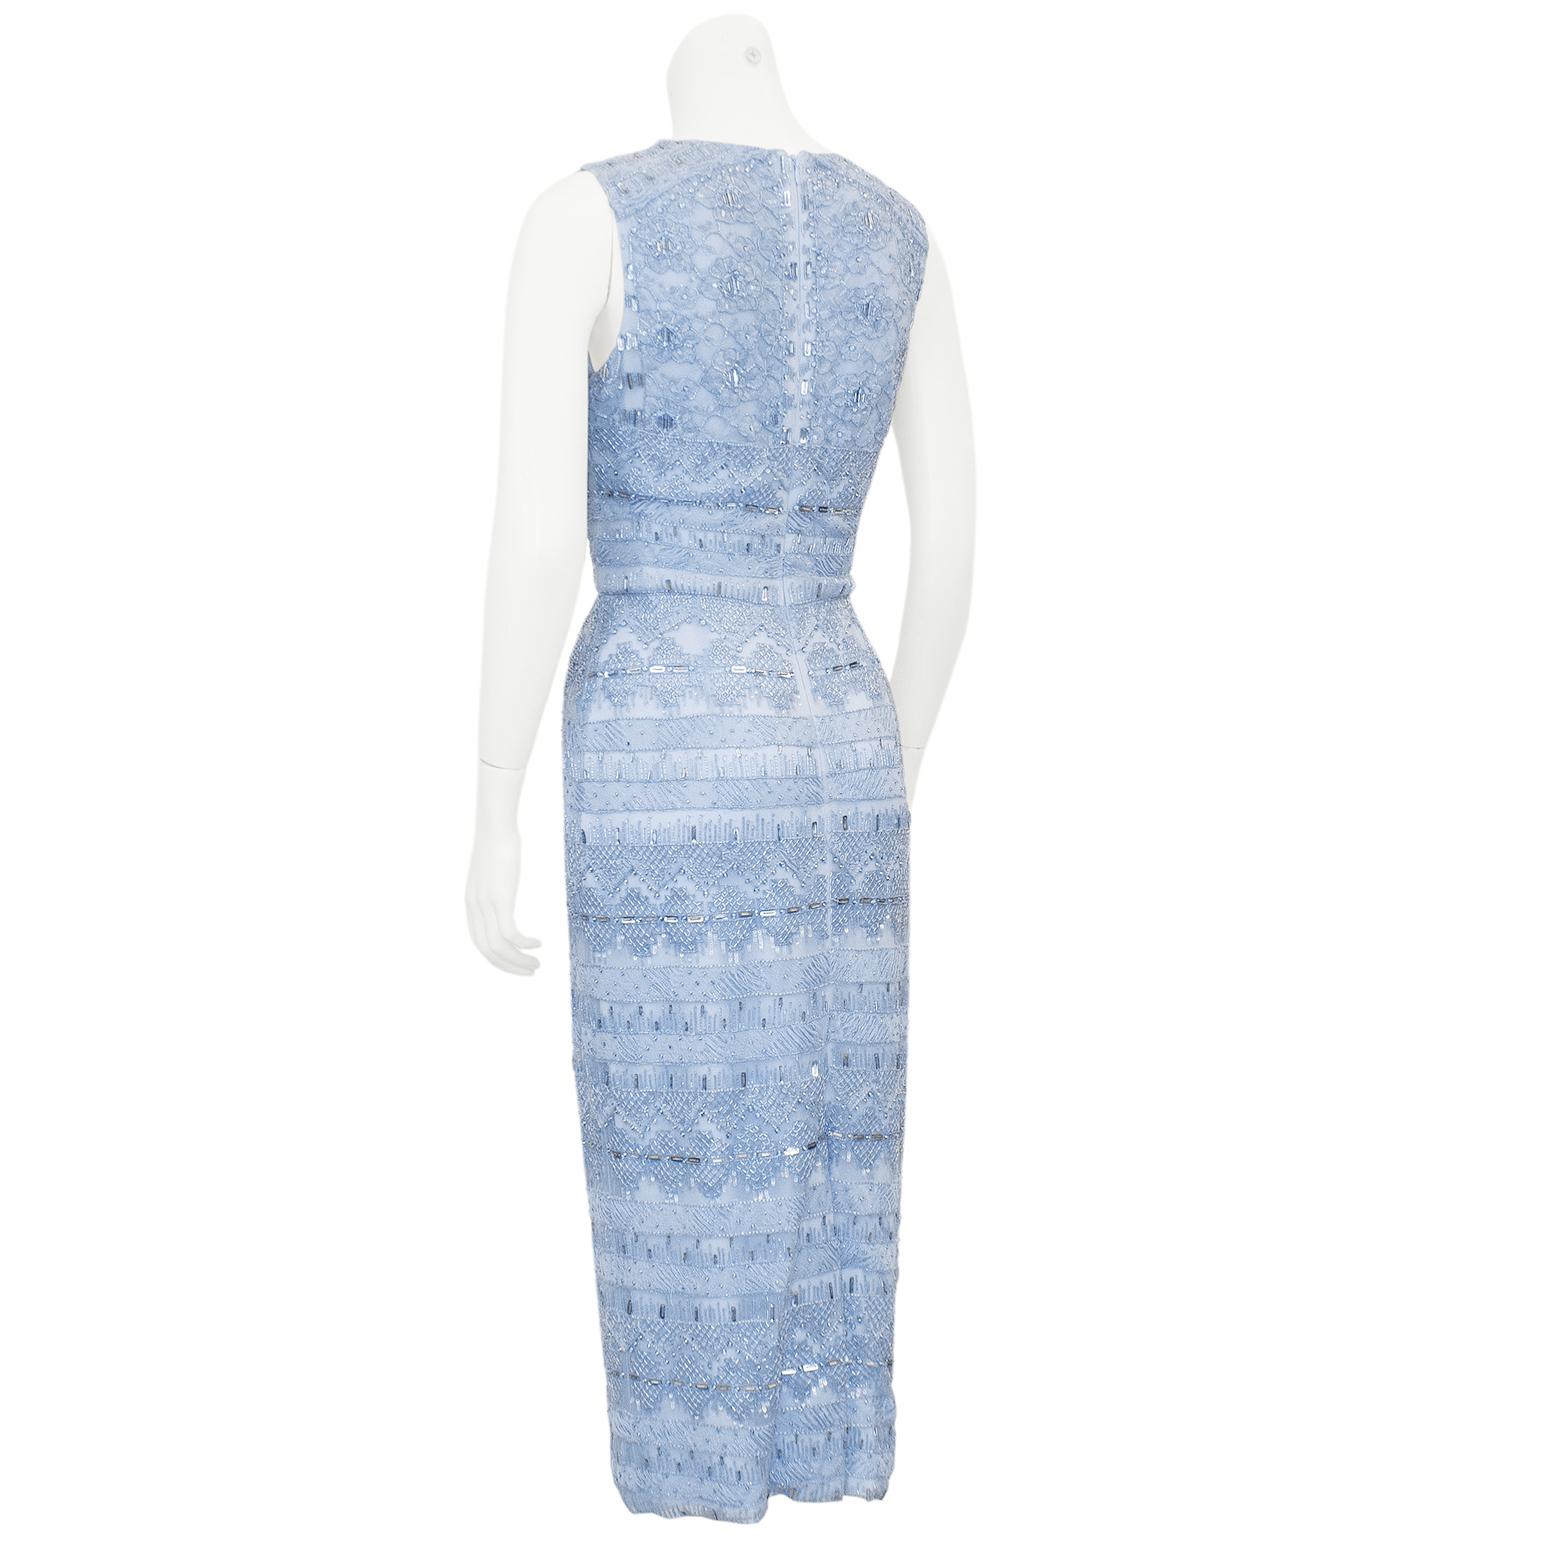 2010s Monique Lhuillier Blue Beaded Dress In Good Condition For Sale In Toronto, Ontario